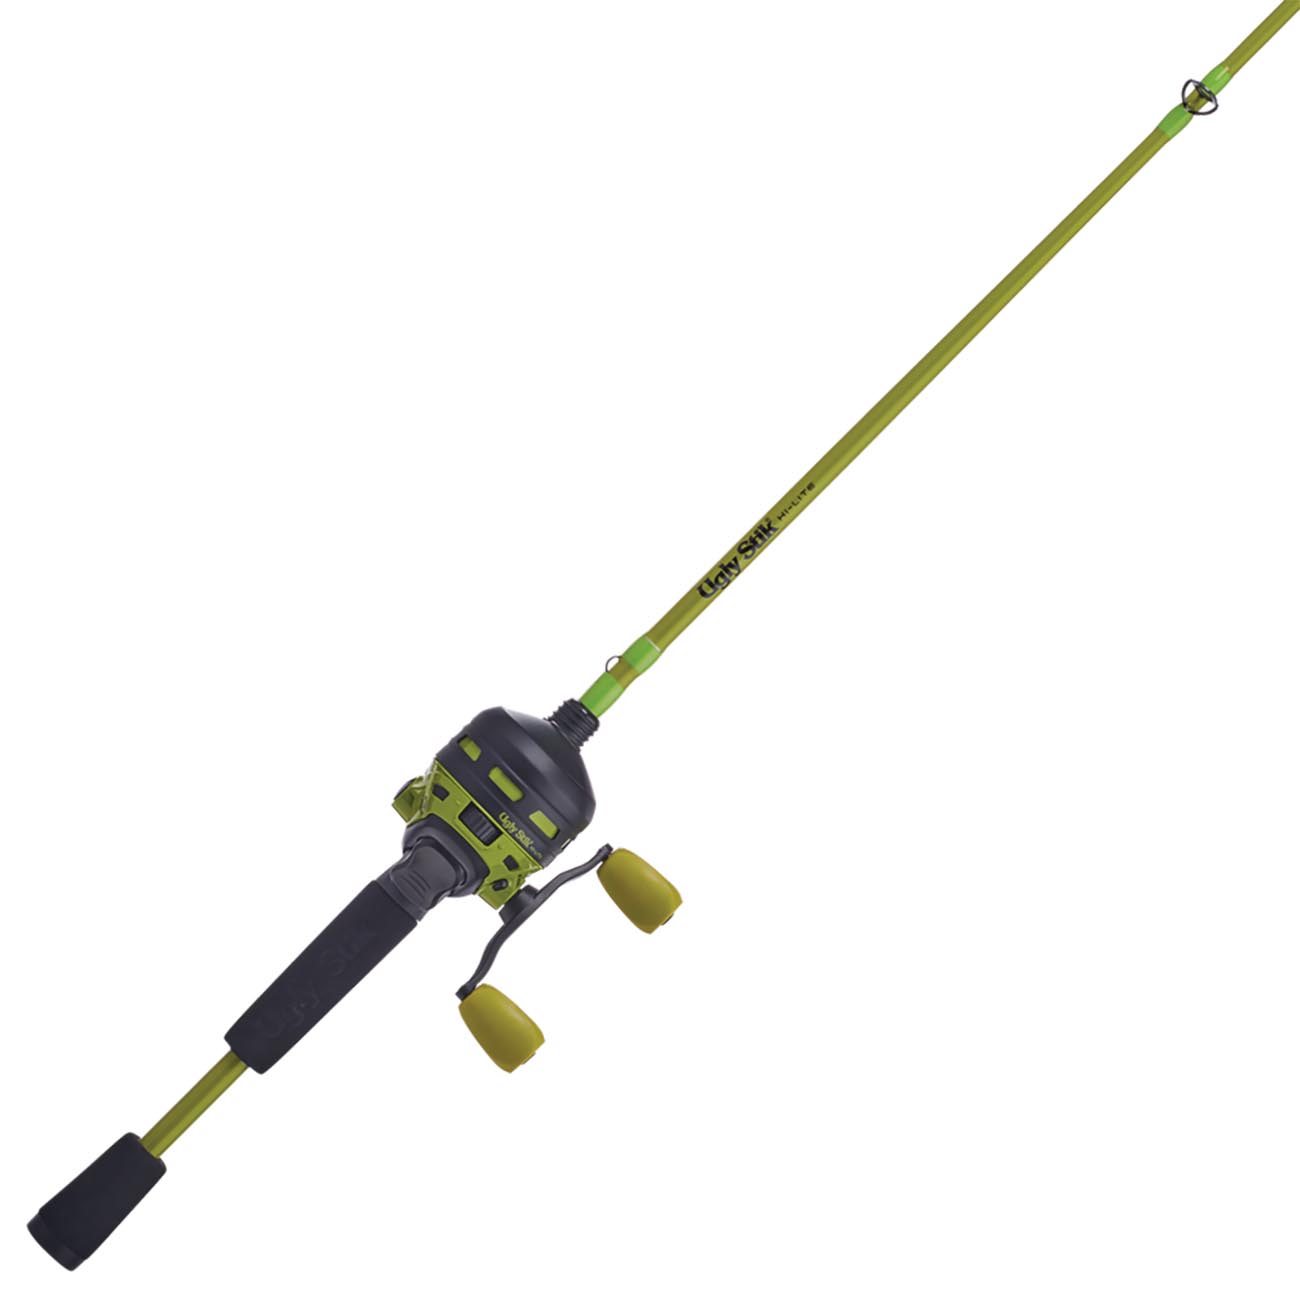 Ugly Stik Hi-Lite Spincast Reel and Fishing Rod Combo, Right/Left